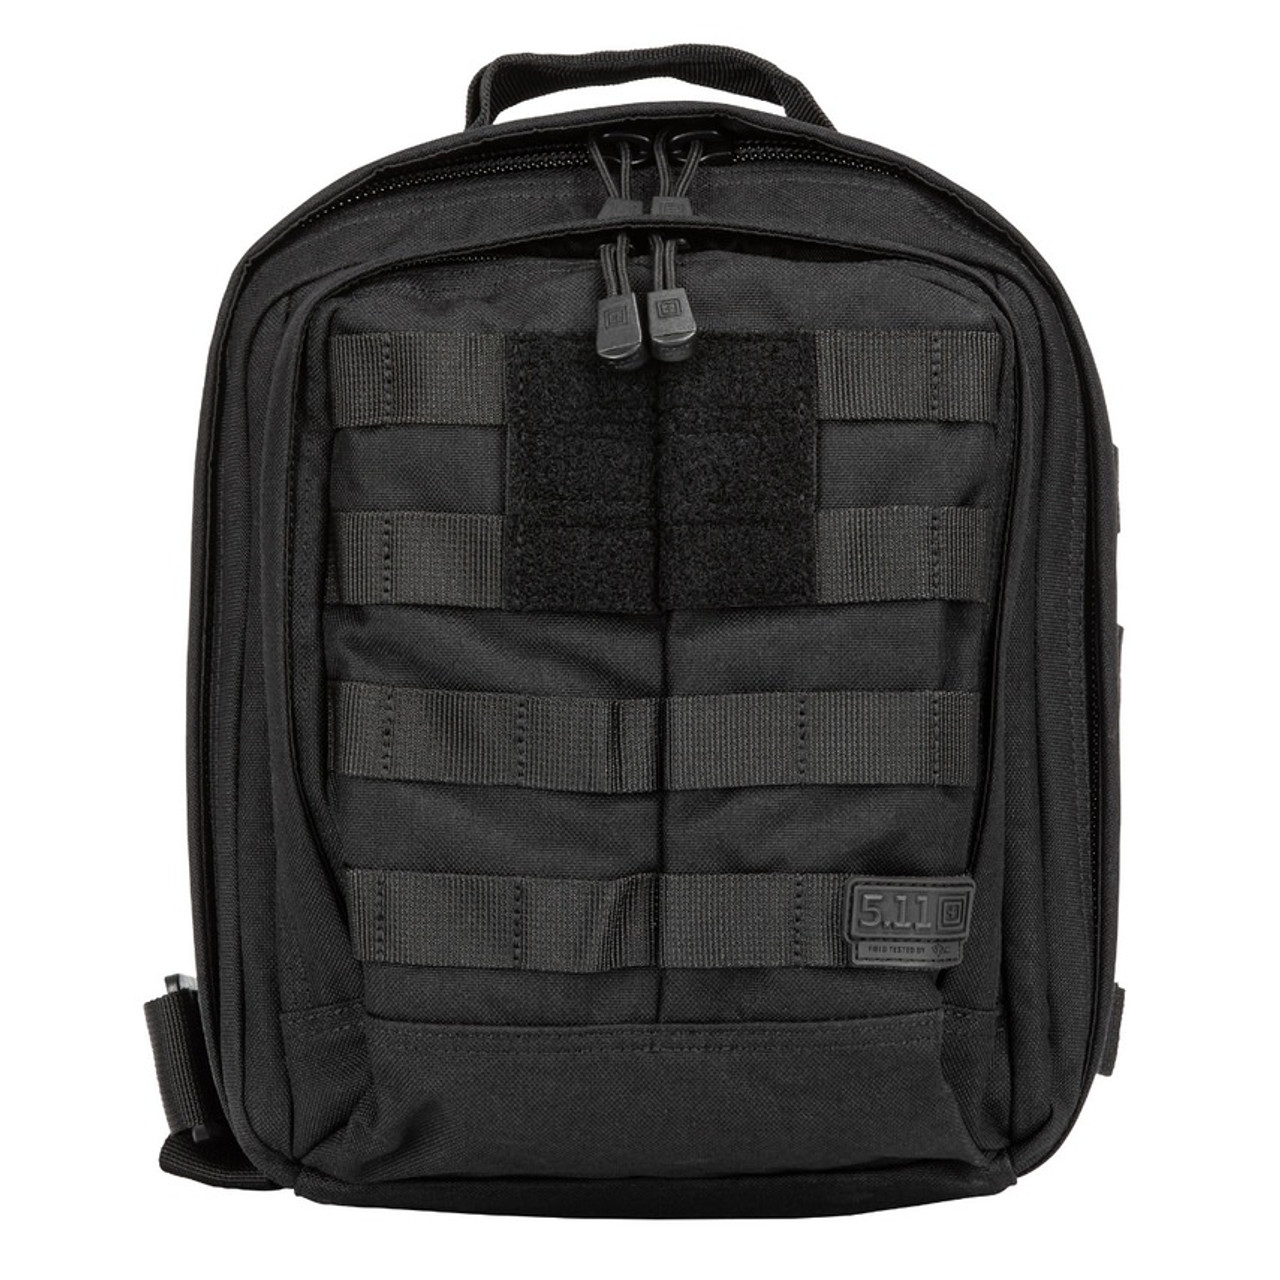 Outdoor Tactical  5.11 Rush MOAB 10 Sling Pack